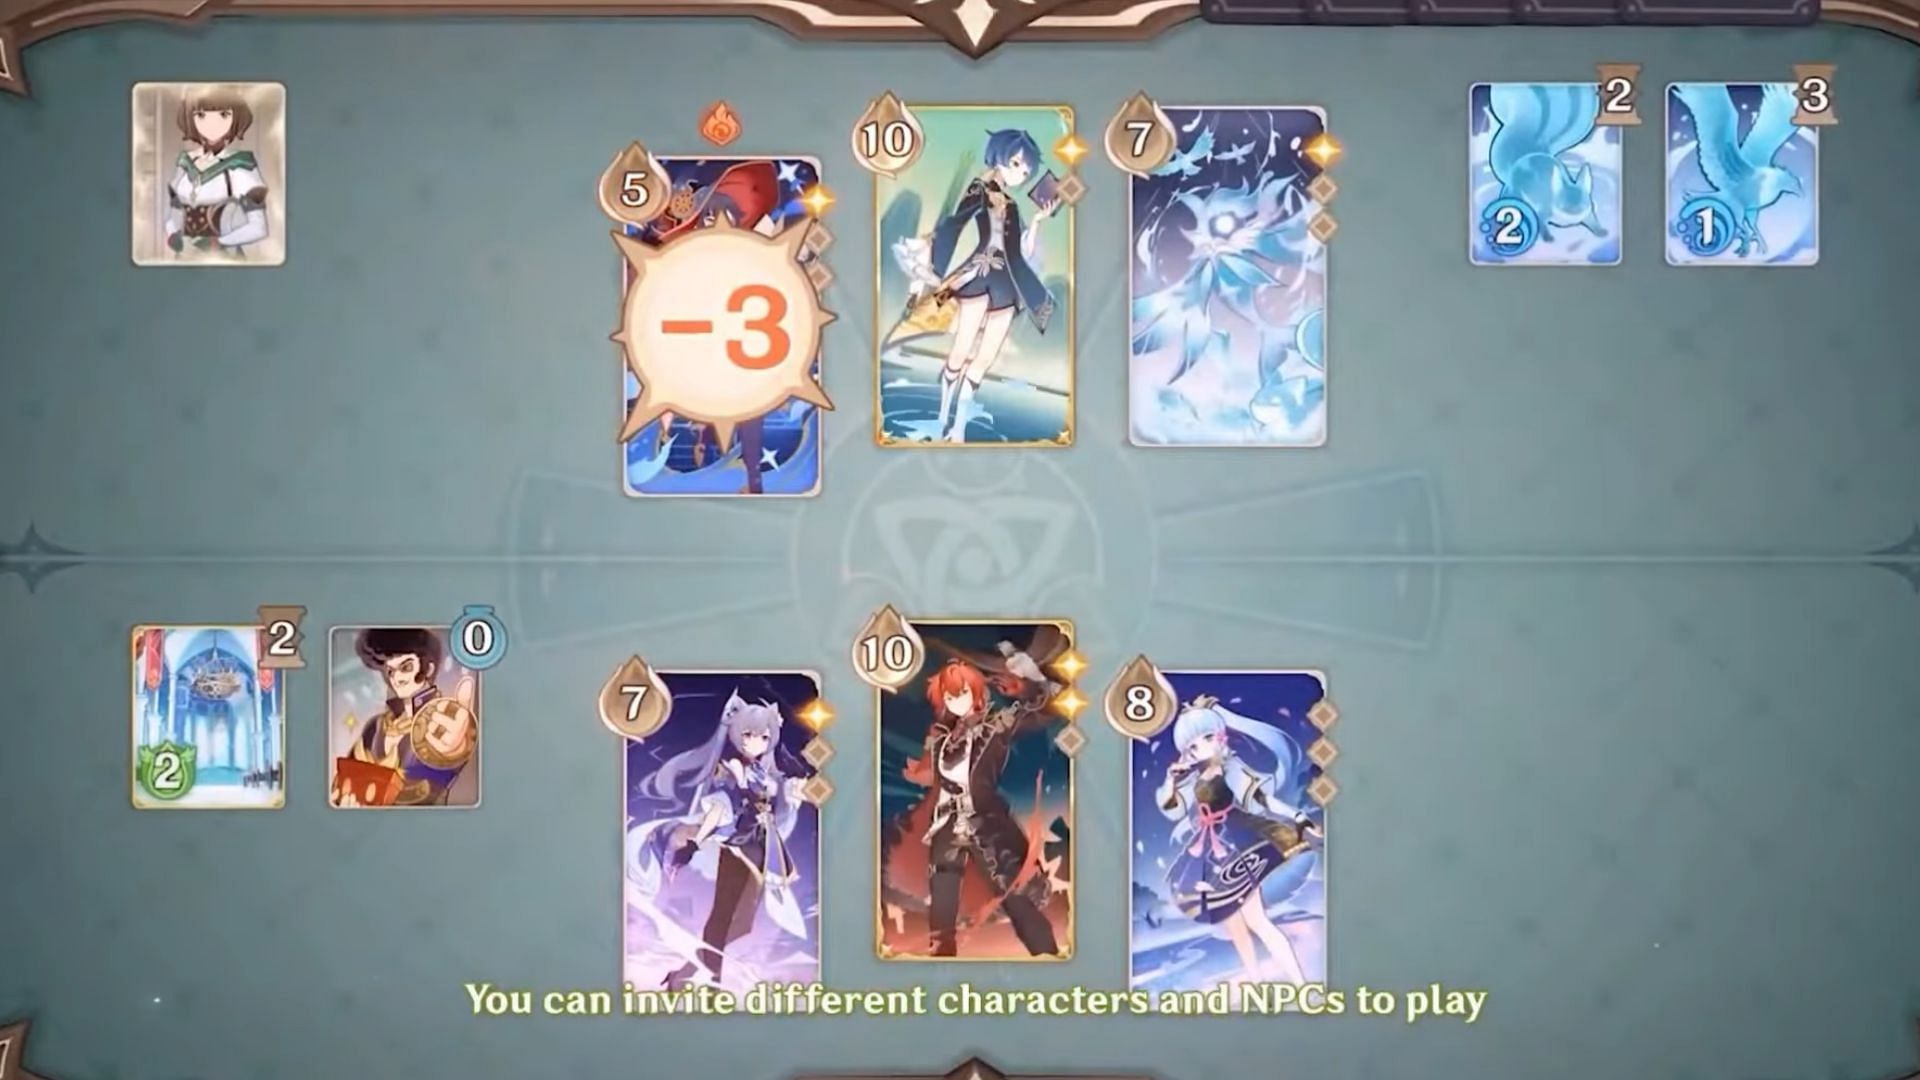 A screenshot of the gameplay for the new game mode